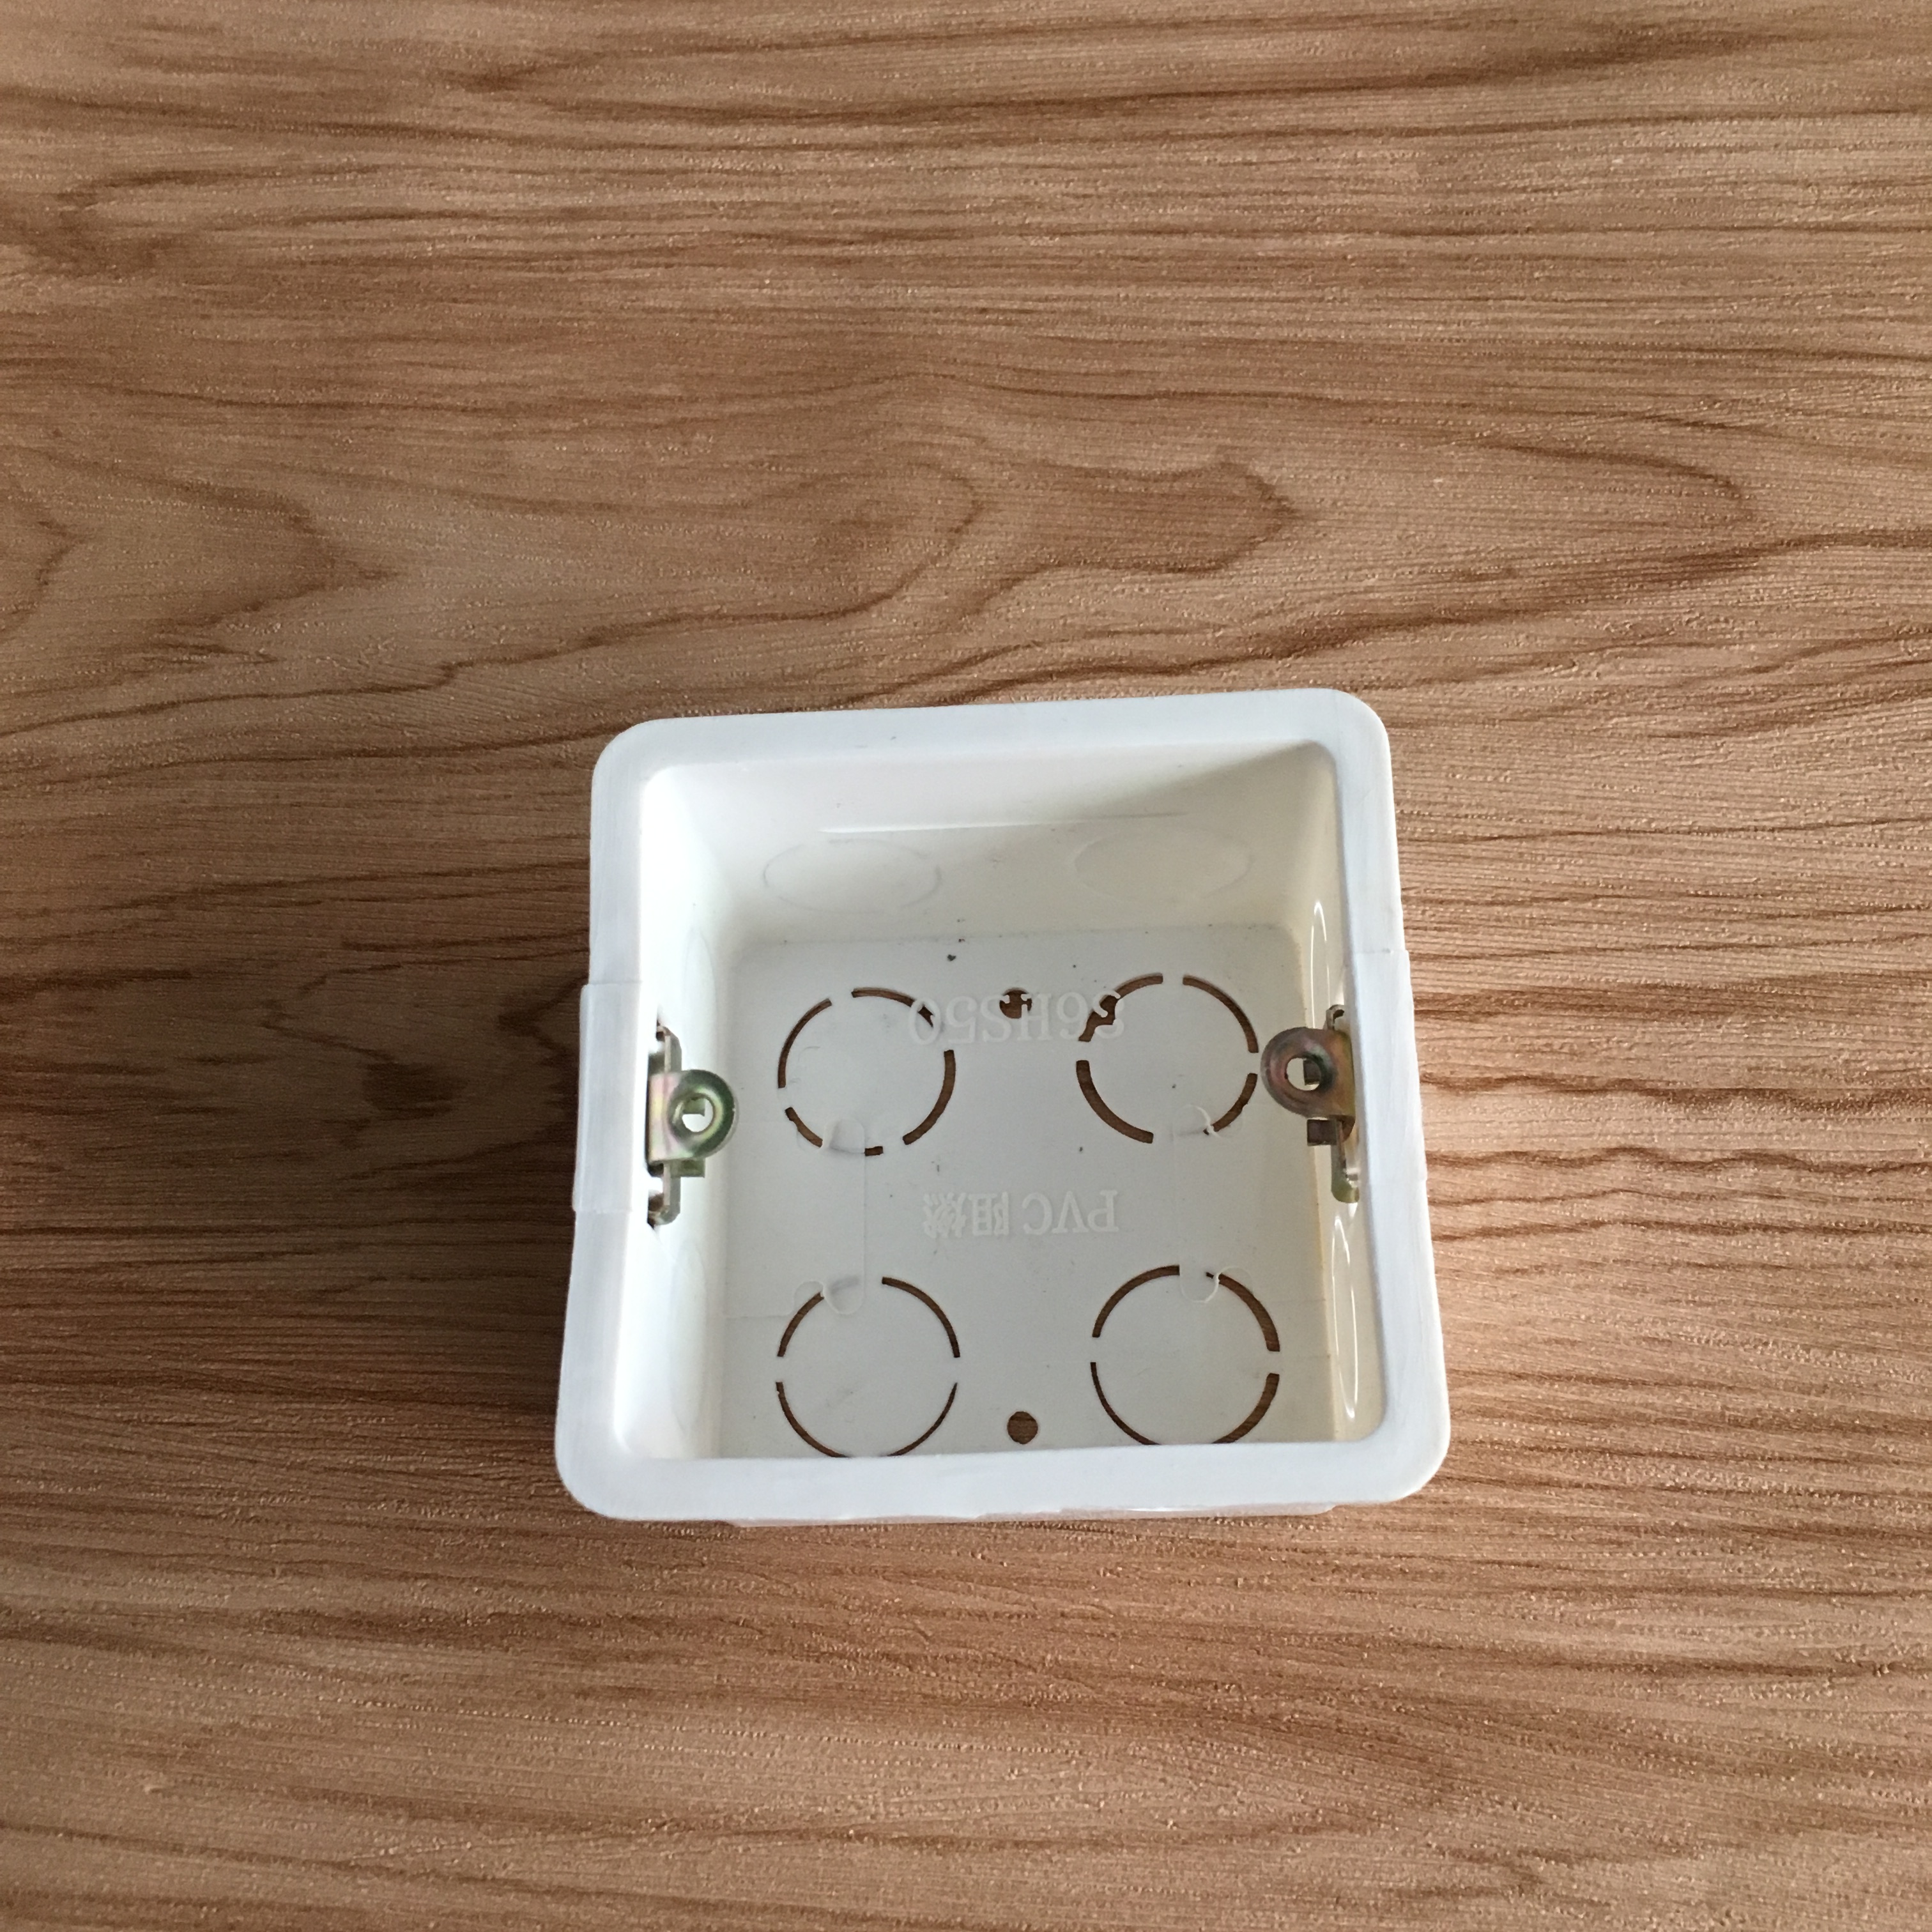 Type 86 universal switch socket box authentic white junction box concealed bottom box concealed underwire box concealed underwire box concealed underwire box concealed underwire box